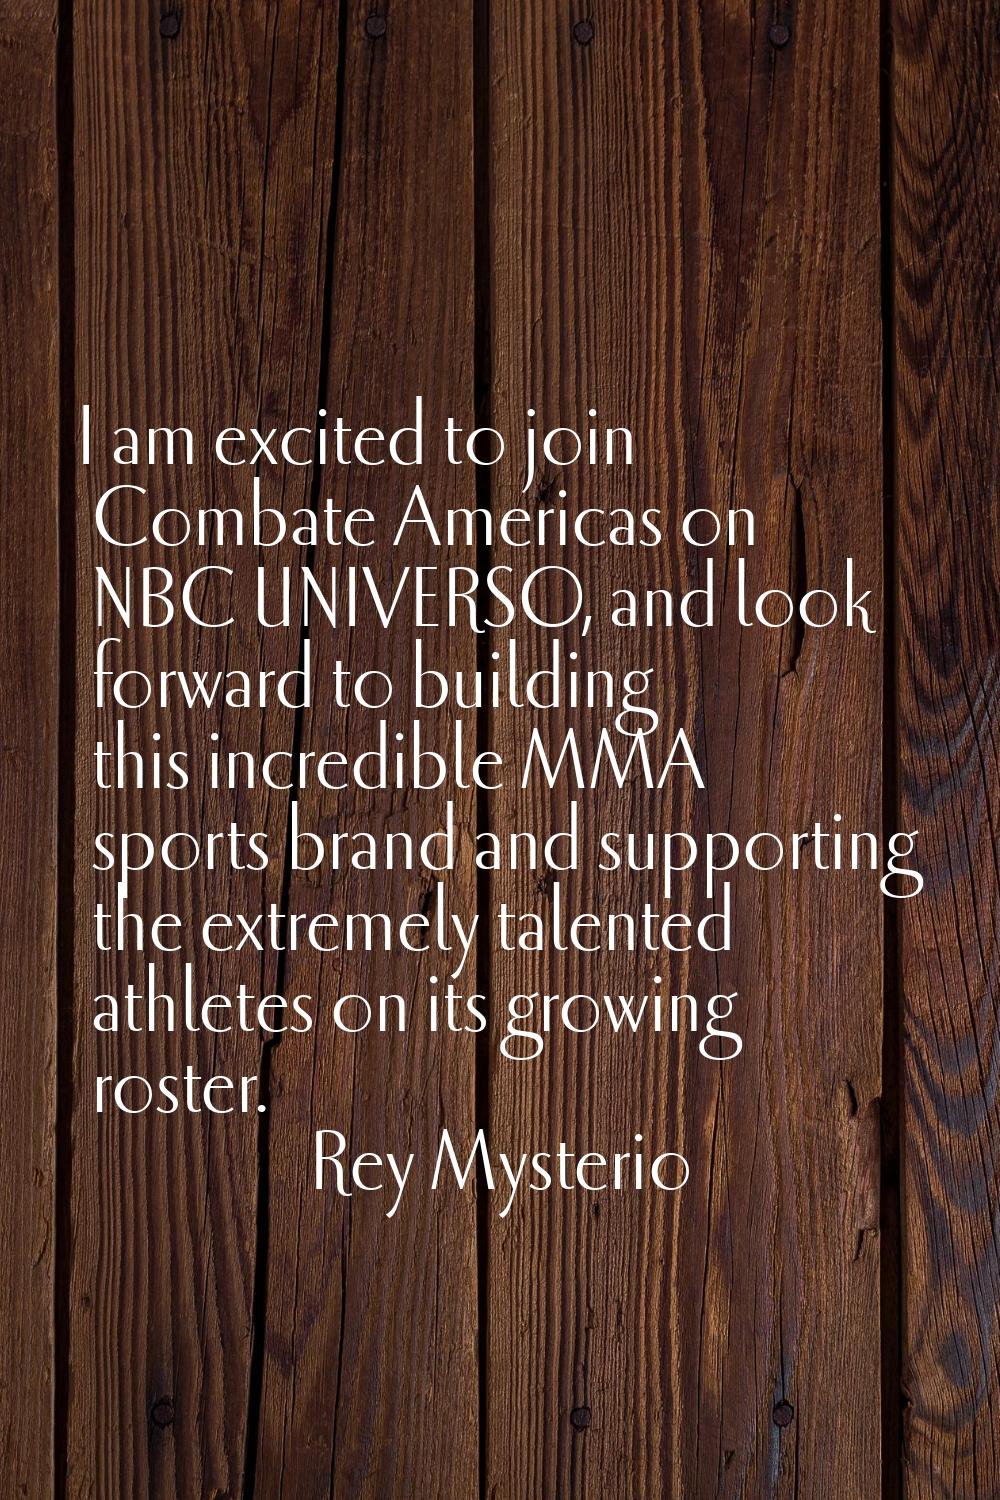 I am excited to join Combate Americas on NBC UNIVERSO, and look forward to building this incredible